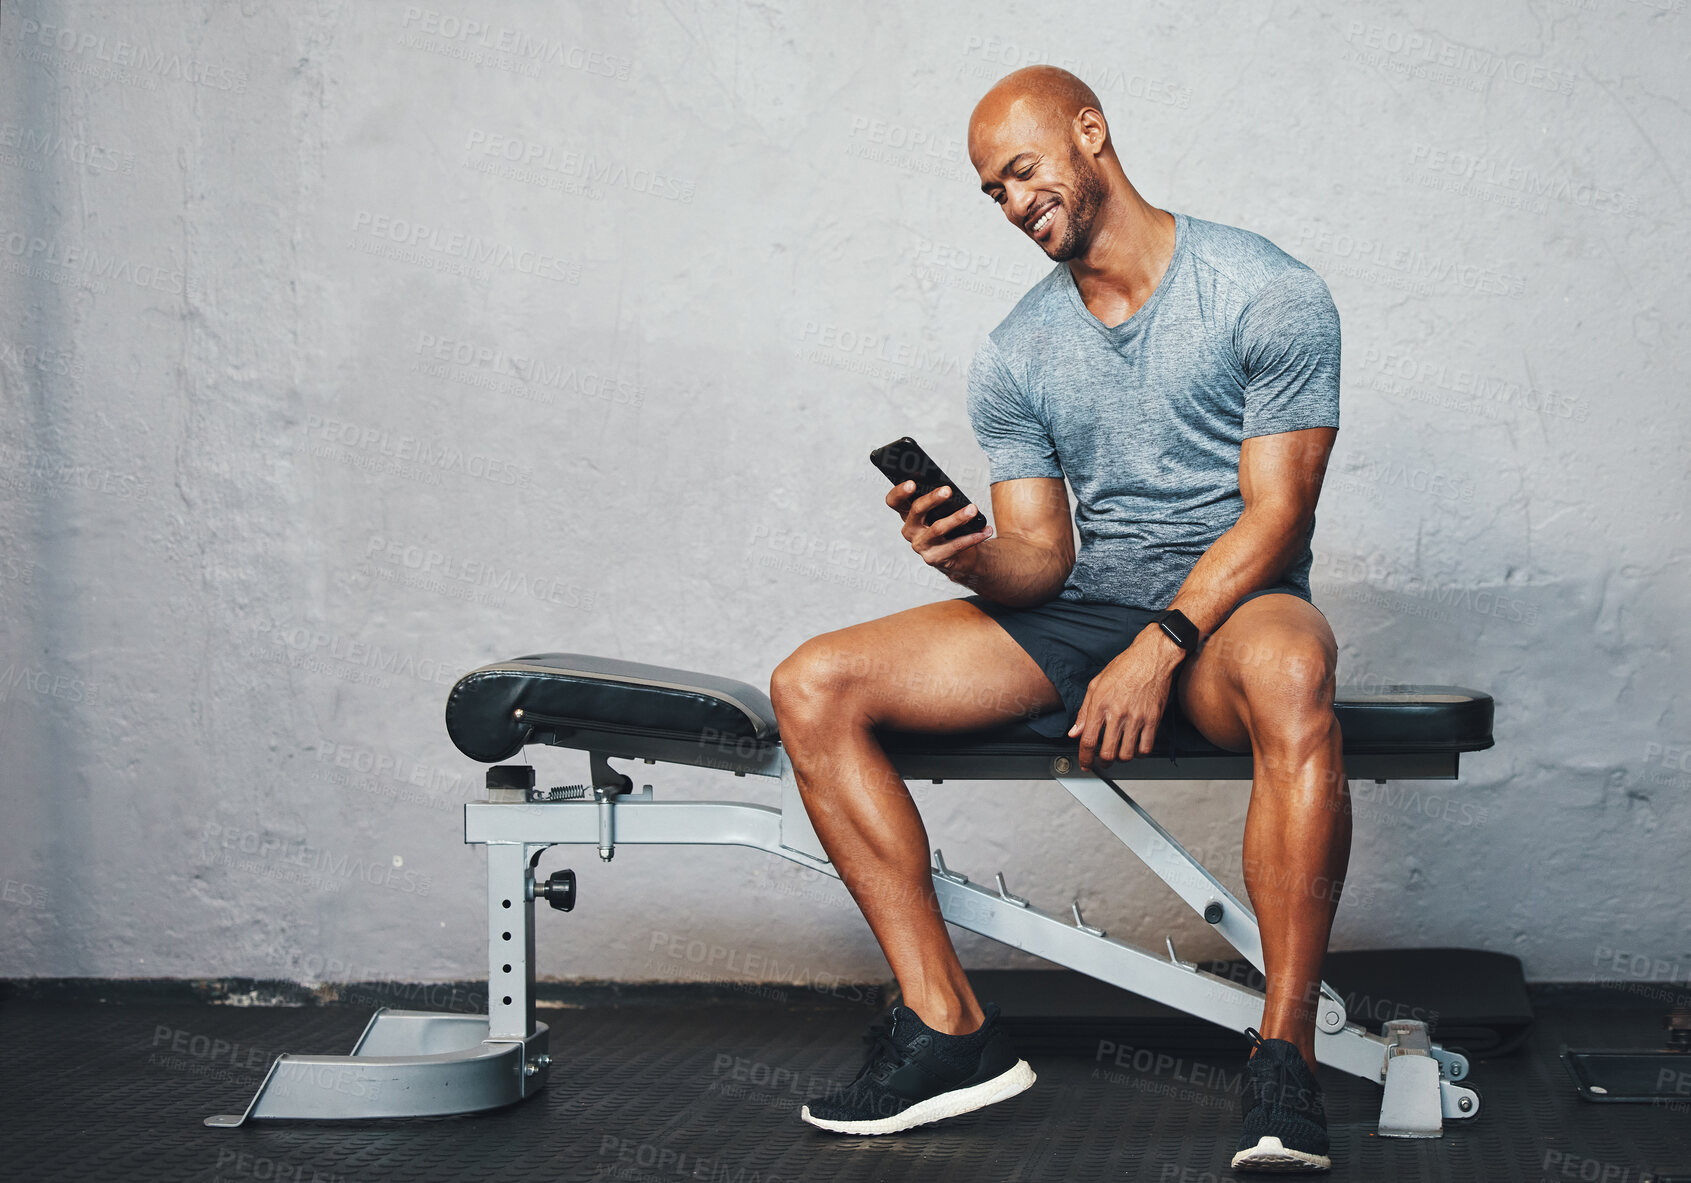 Buy stock photo Shot of a muscular young man using a cellphone in a gym